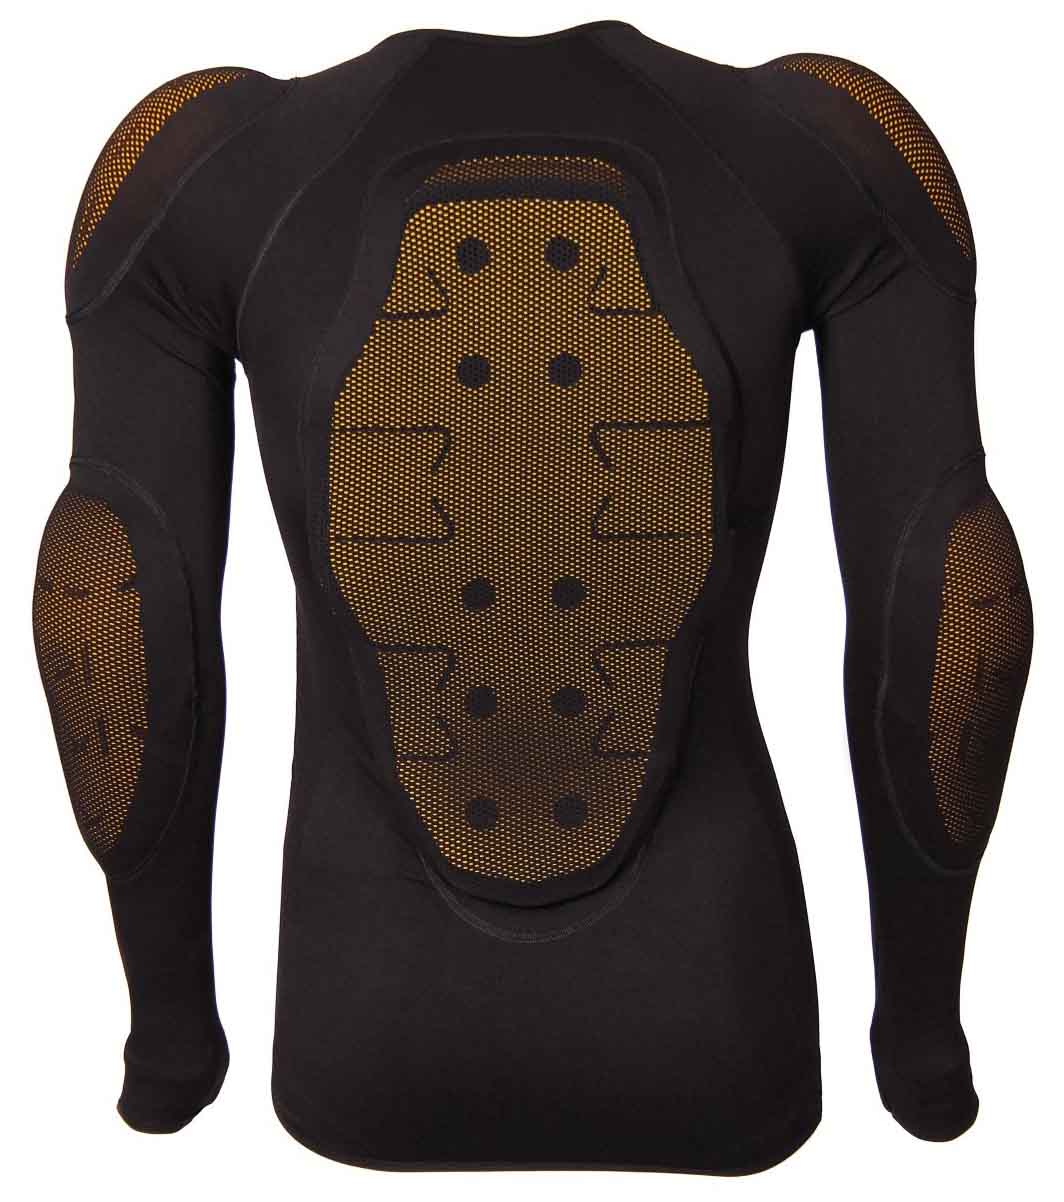 Forcefield Pro Shirt X-V 2 Body Armour